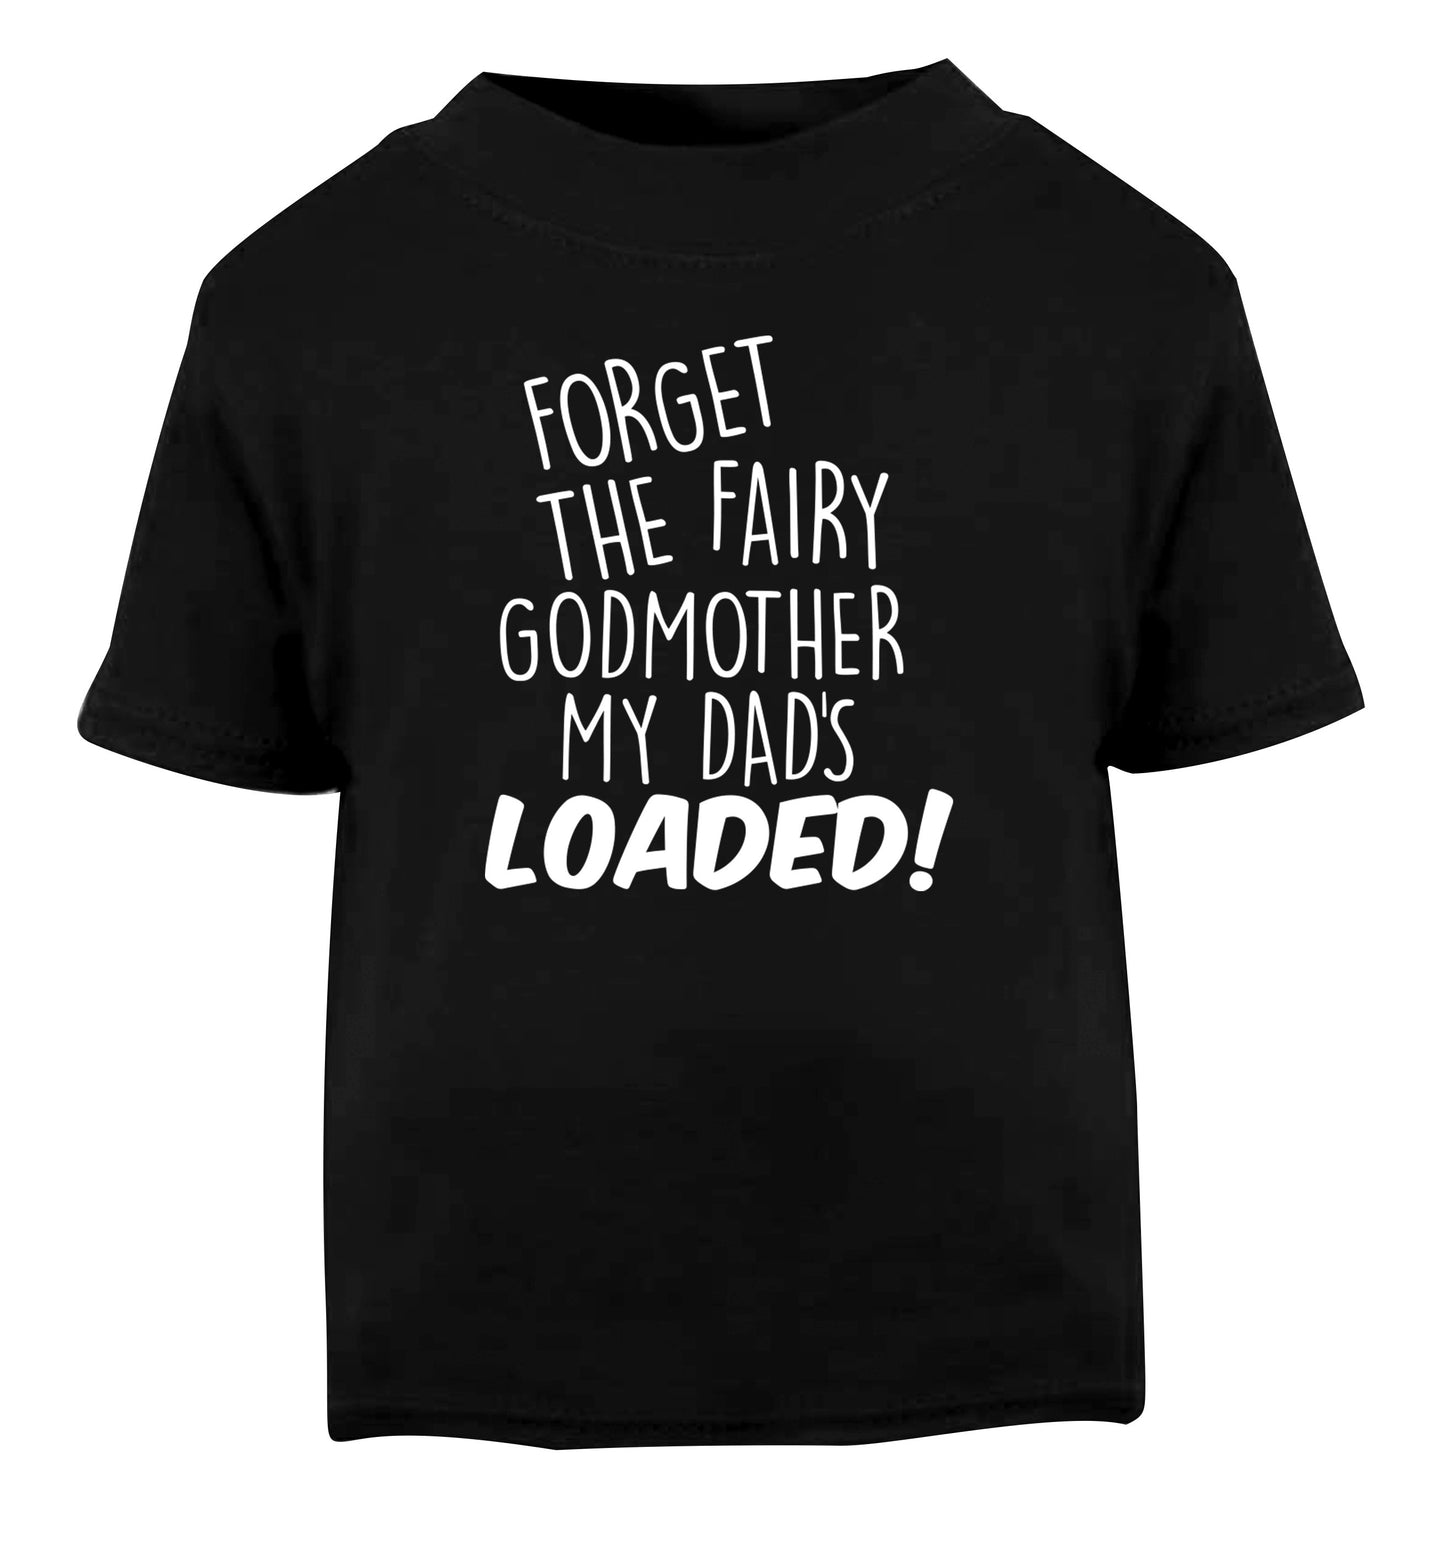 Forget the fairy godmother my dad's loaded Black Baby Toddler Tshirt 2 years